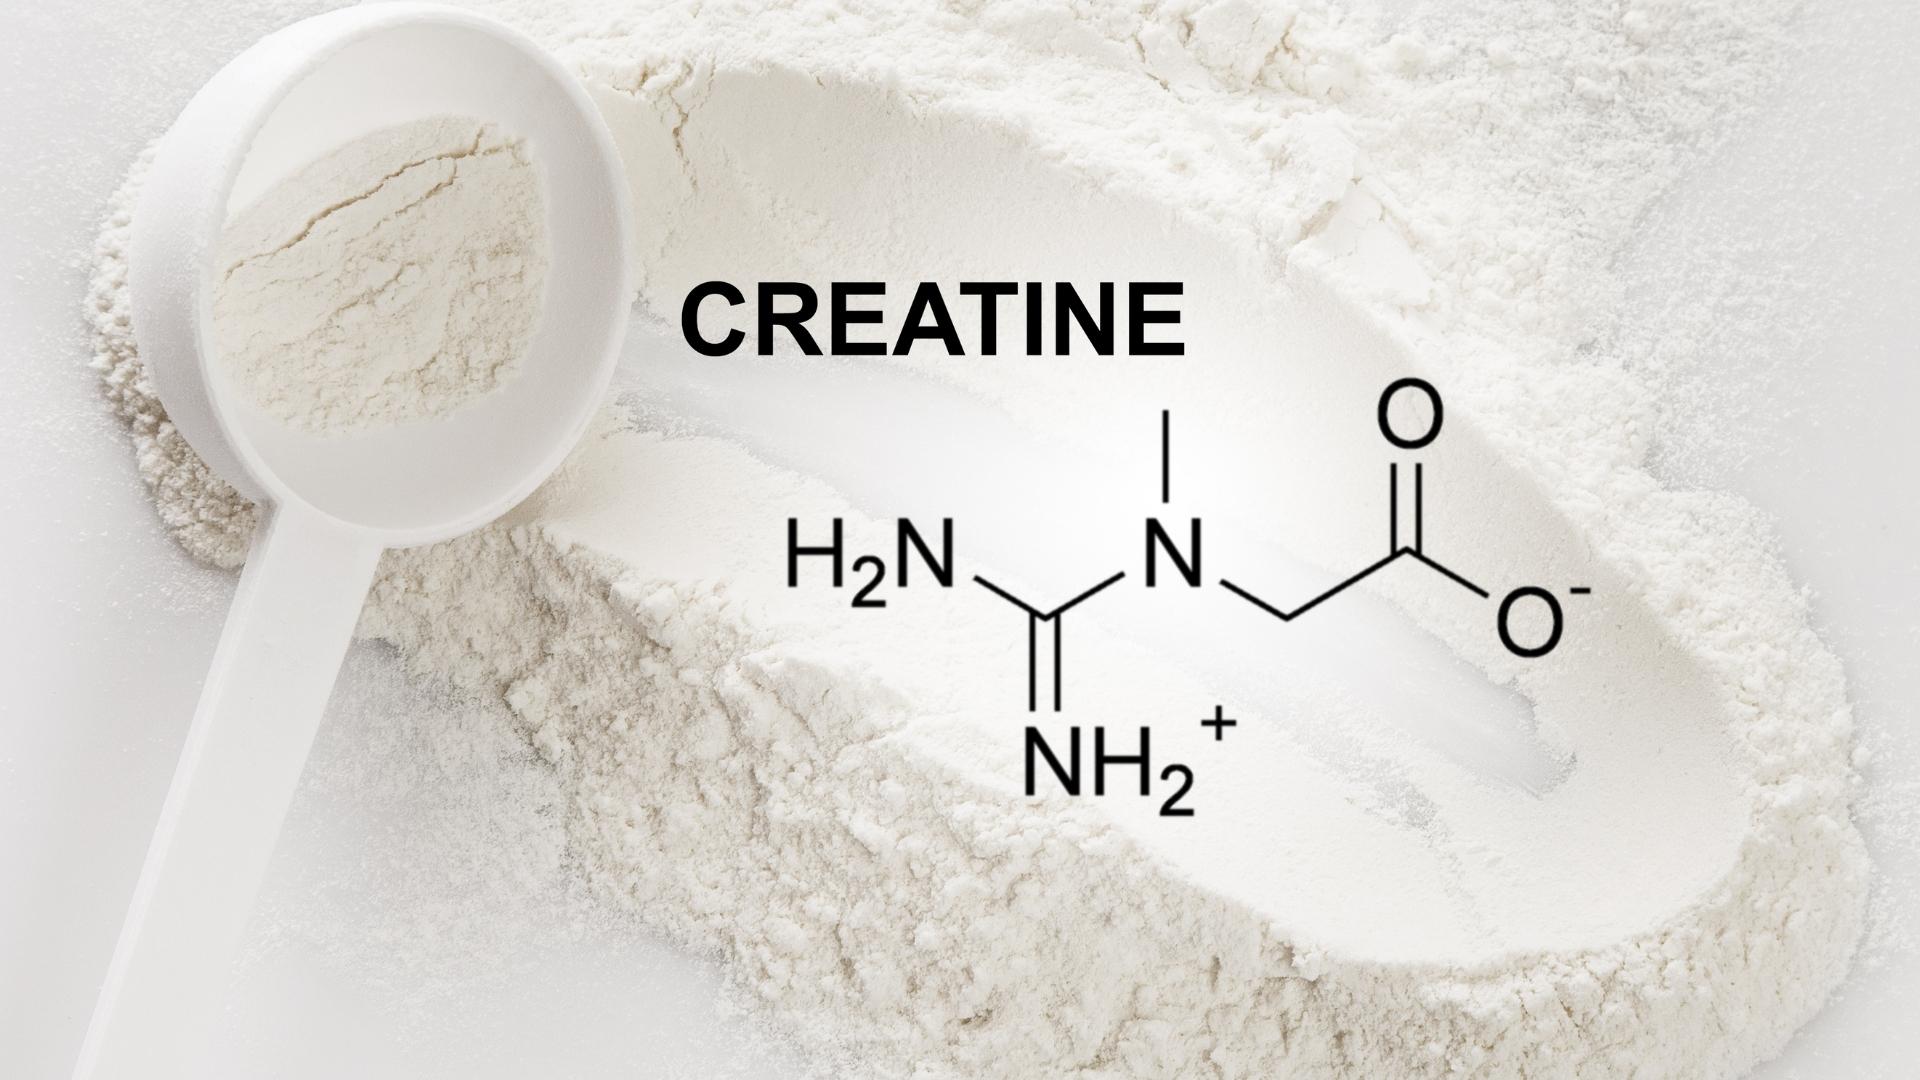 Creatine Monohydrate - pre-workout ingredients increase strength